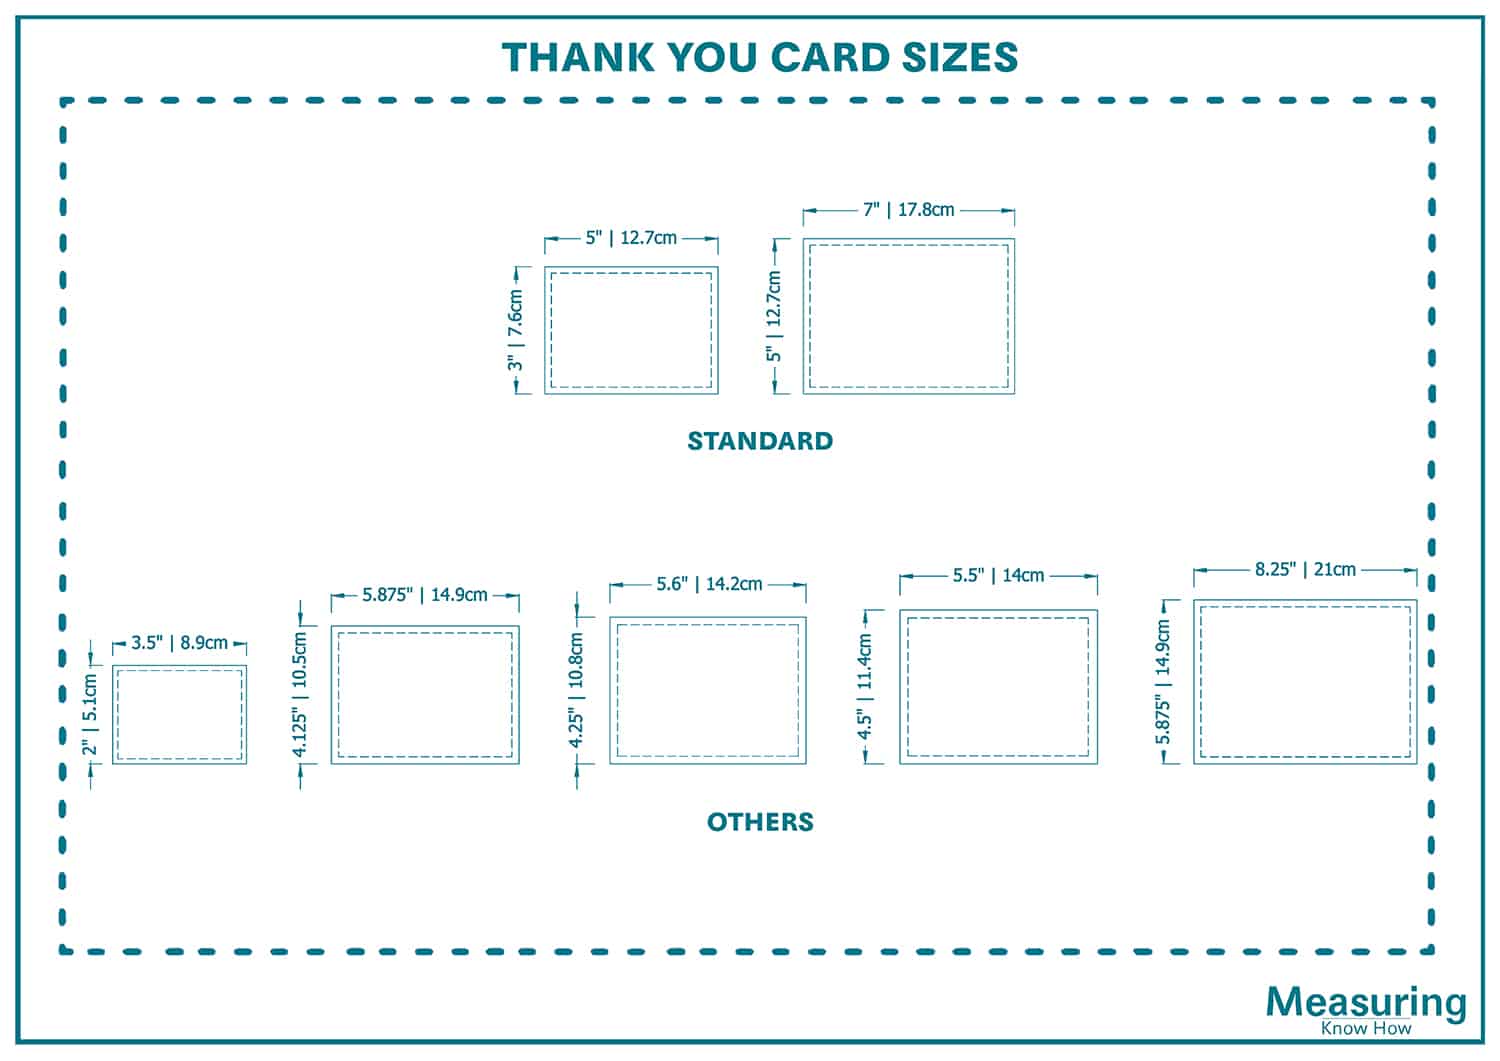 Thank You Card Sizes